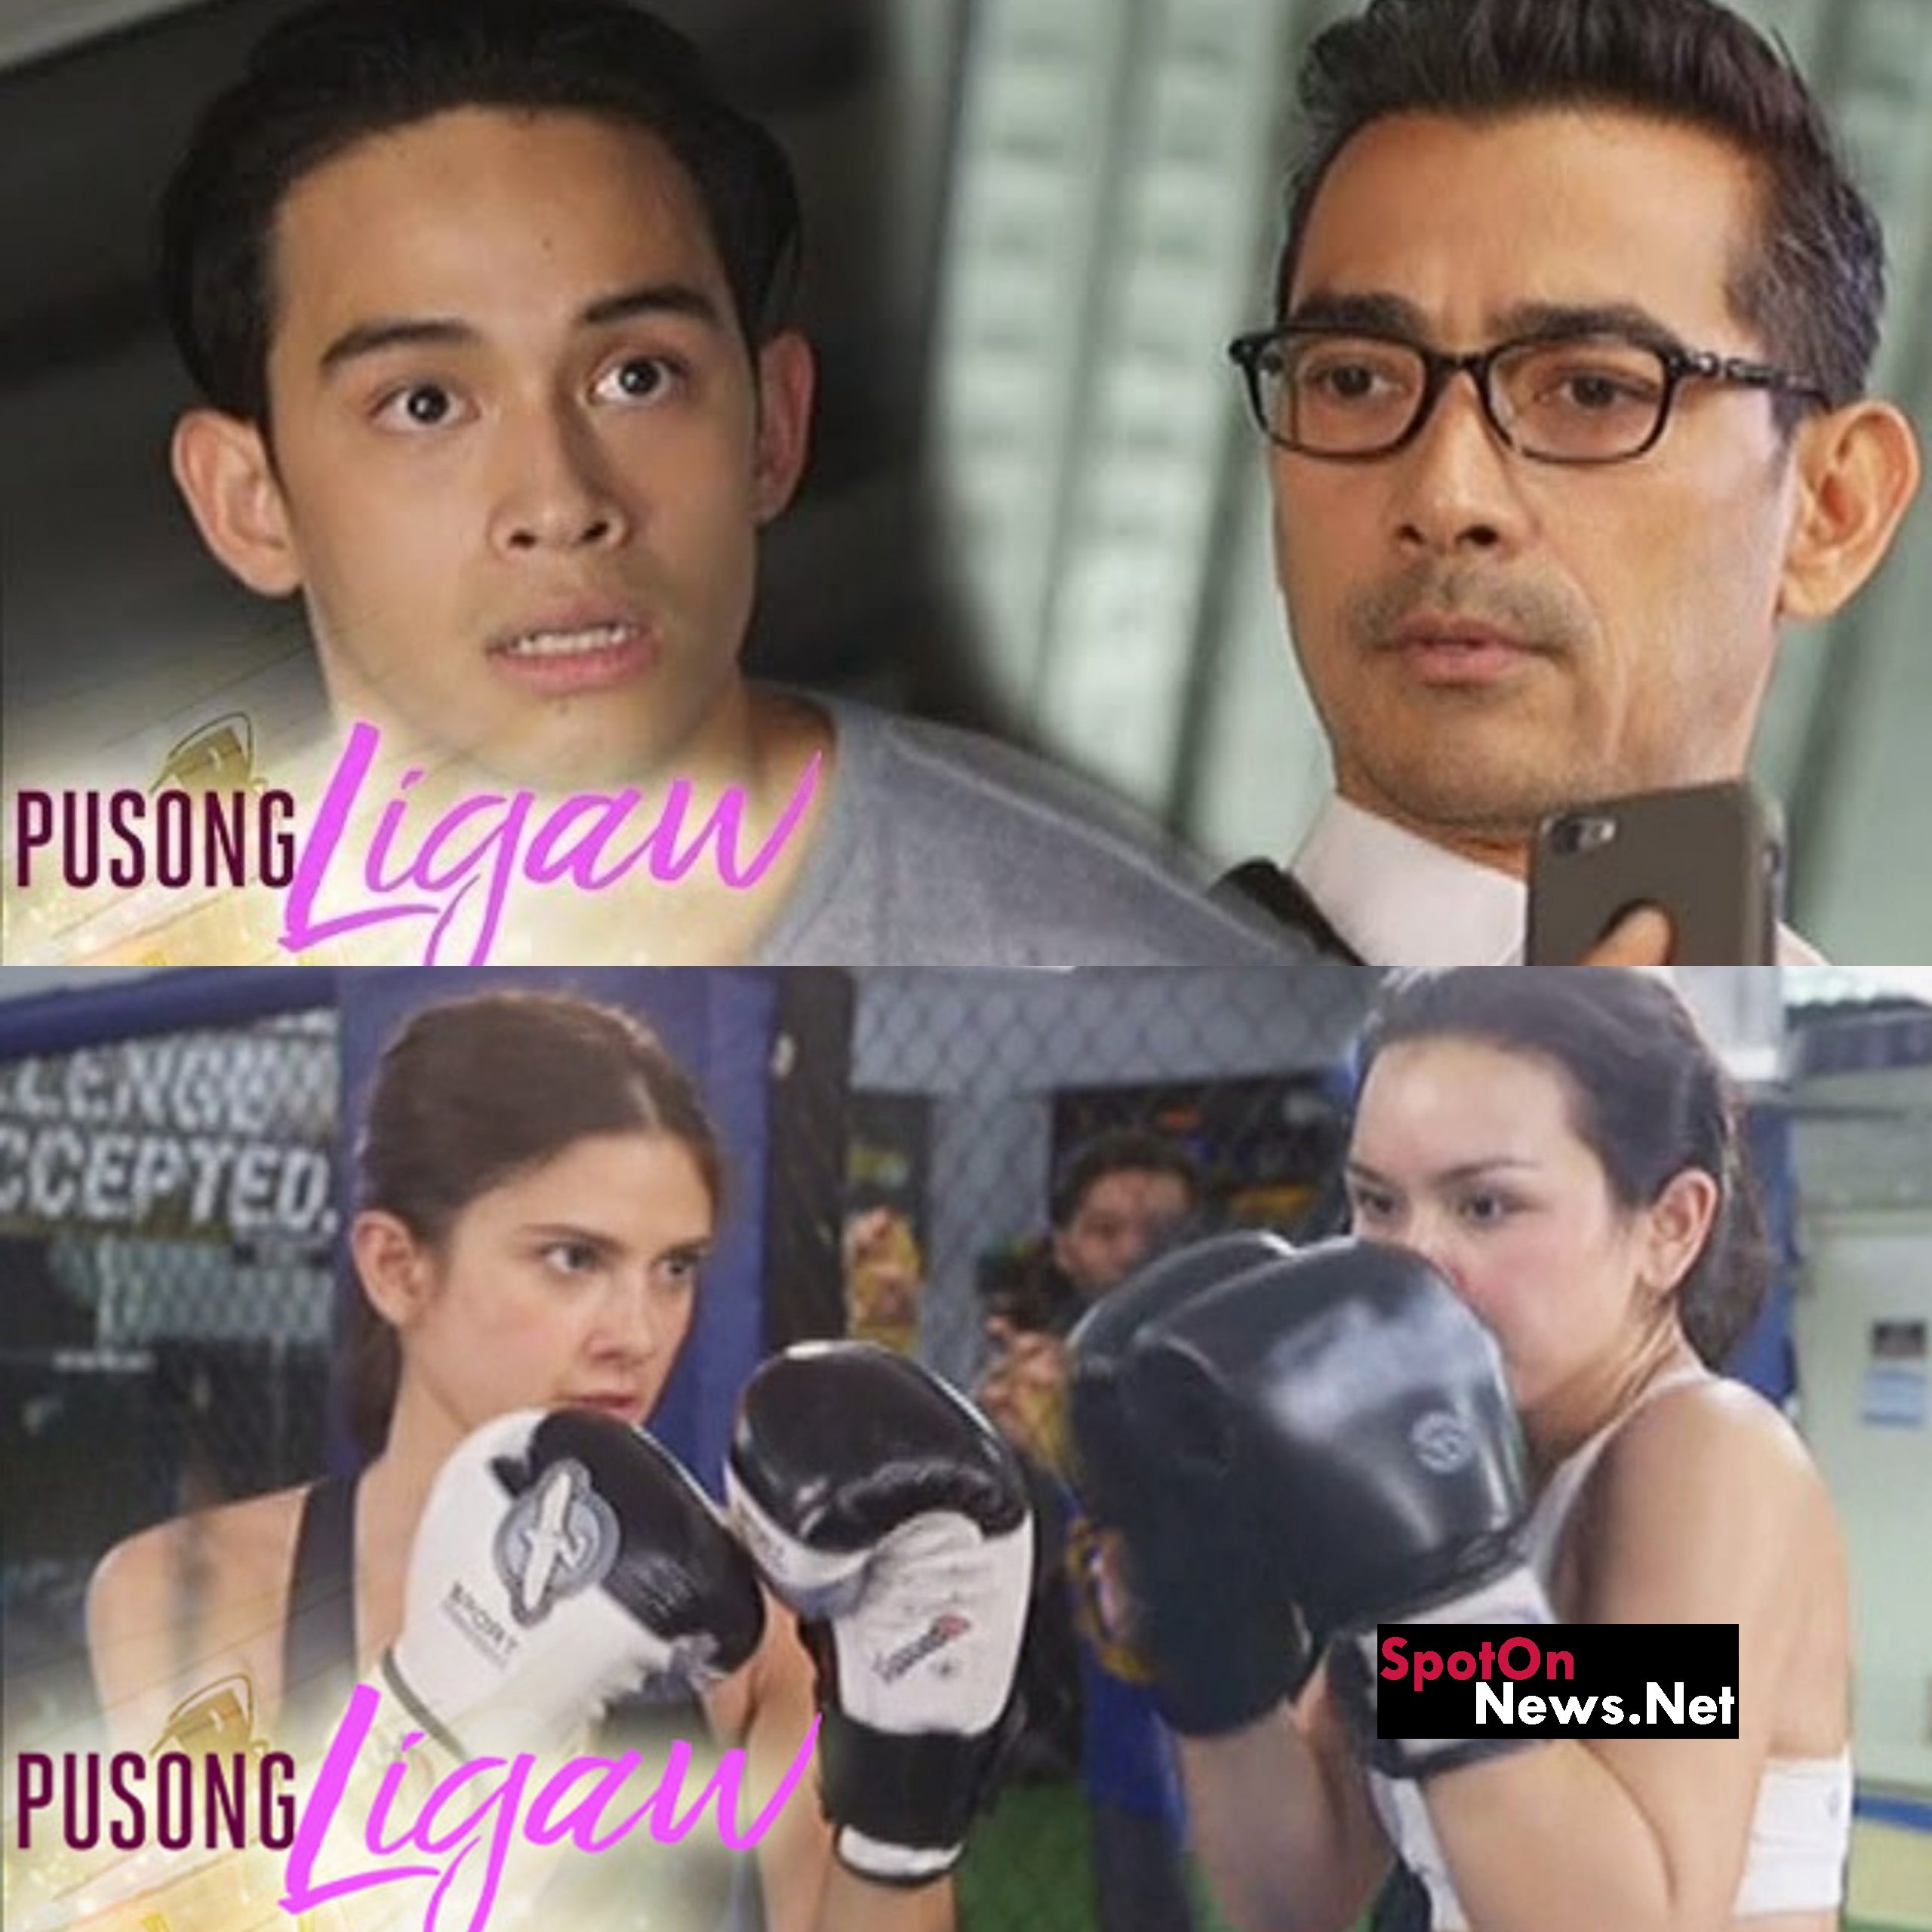 Lost Hearts (Pusong Ligaw) Episode 36 Tessa learns self defense skills and face off with Marga in the ring